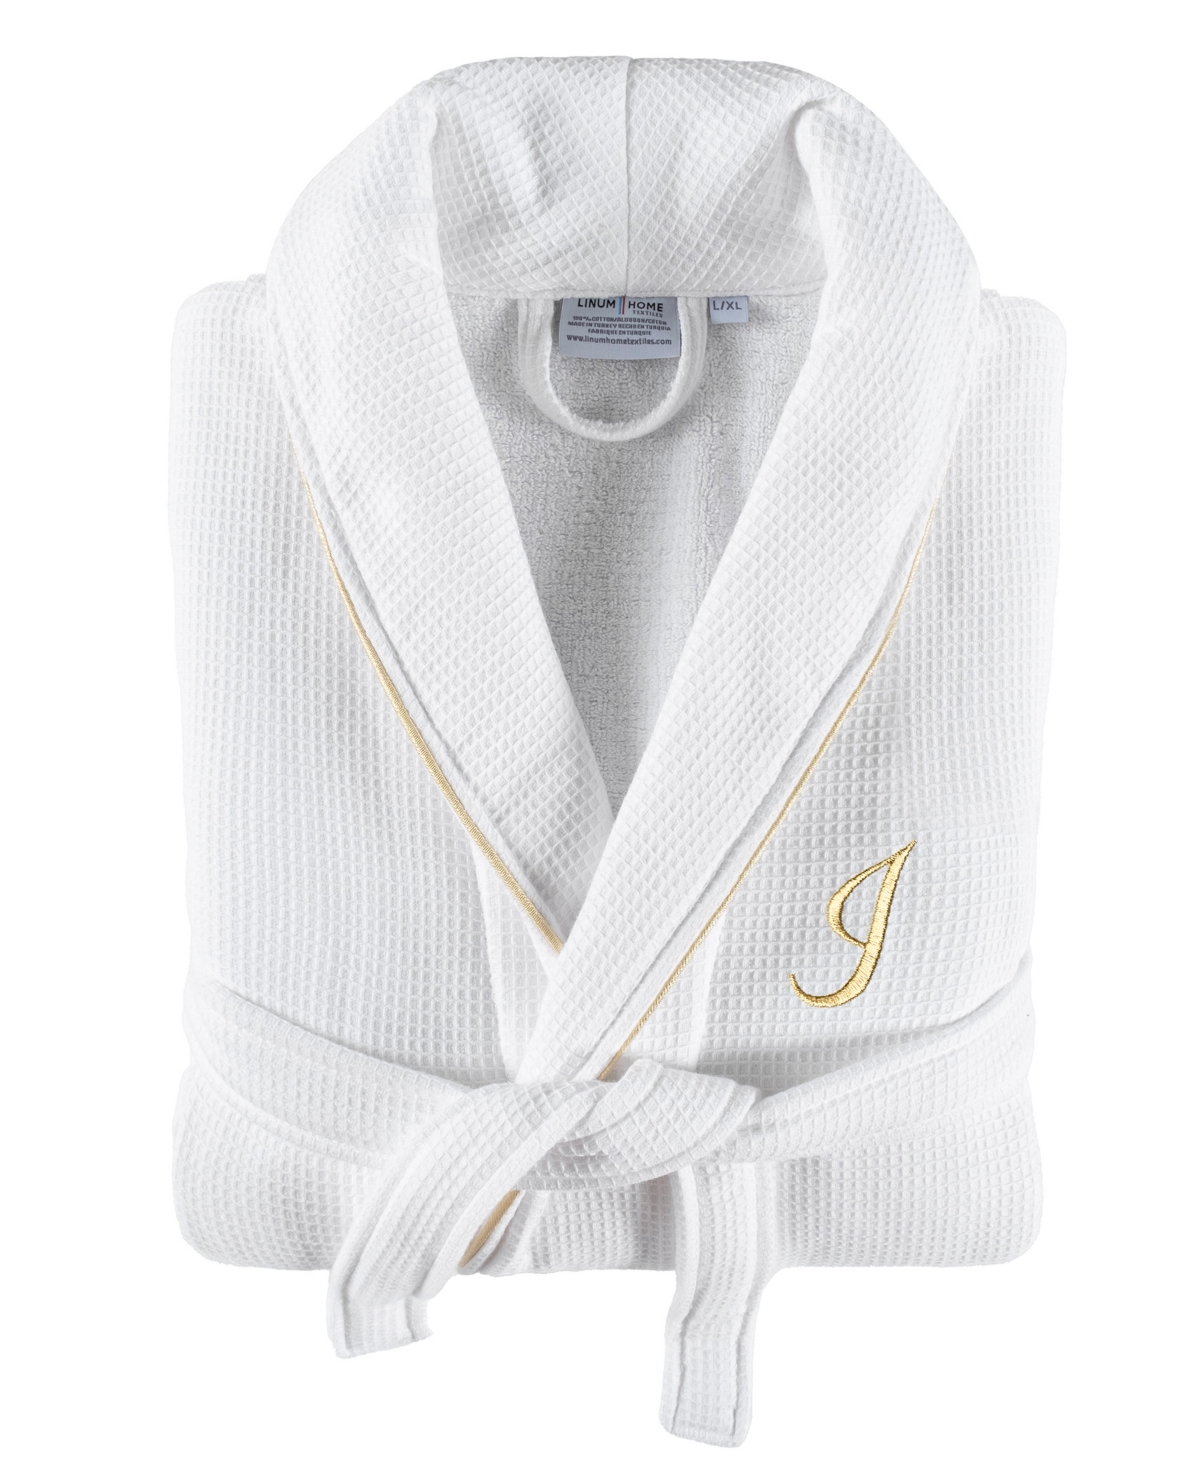 Linum Home Textiles 100% Turkish Cotton Unisex Personalized Waffle Weave Terry Bathrobe With Satin Piped Trim In White I